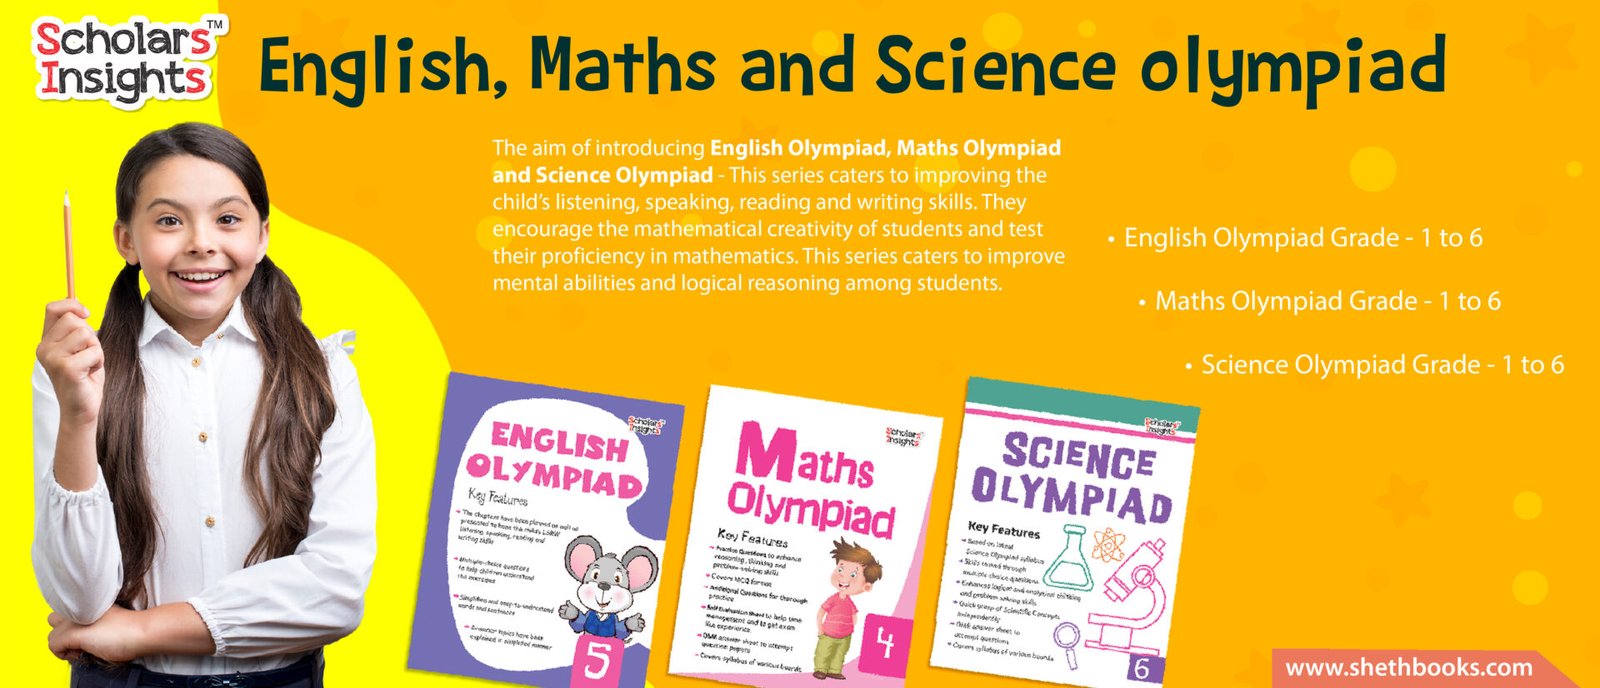 English Maths and Science Olympiad